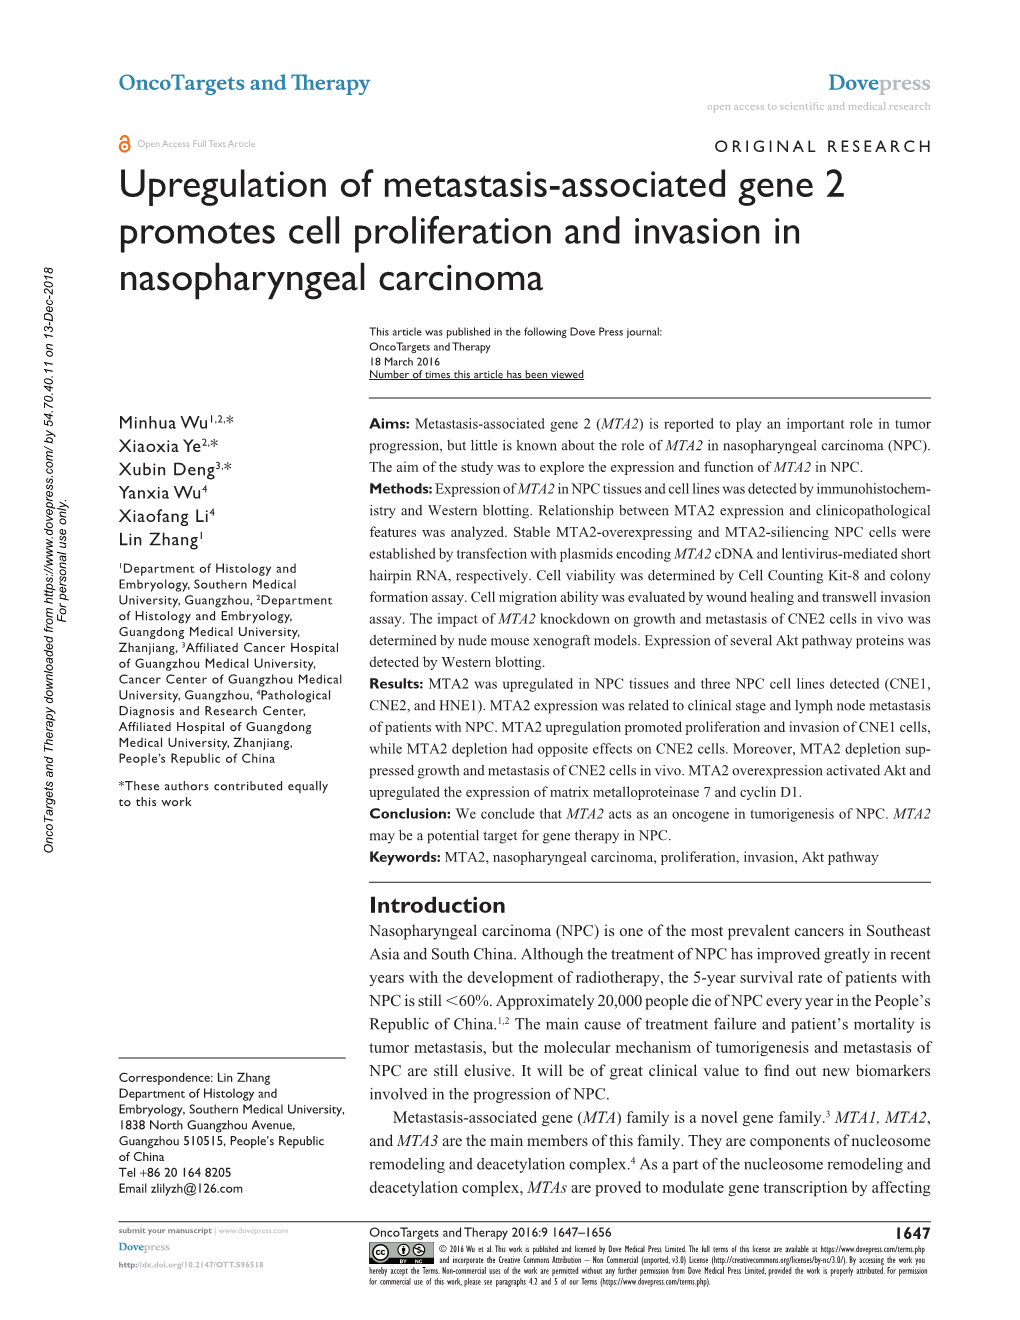 Upregulation of Metastasis-Associated Gene 2 Promotes Cell Proliferation and Invasion in Nasopharyngeal Carcinoma